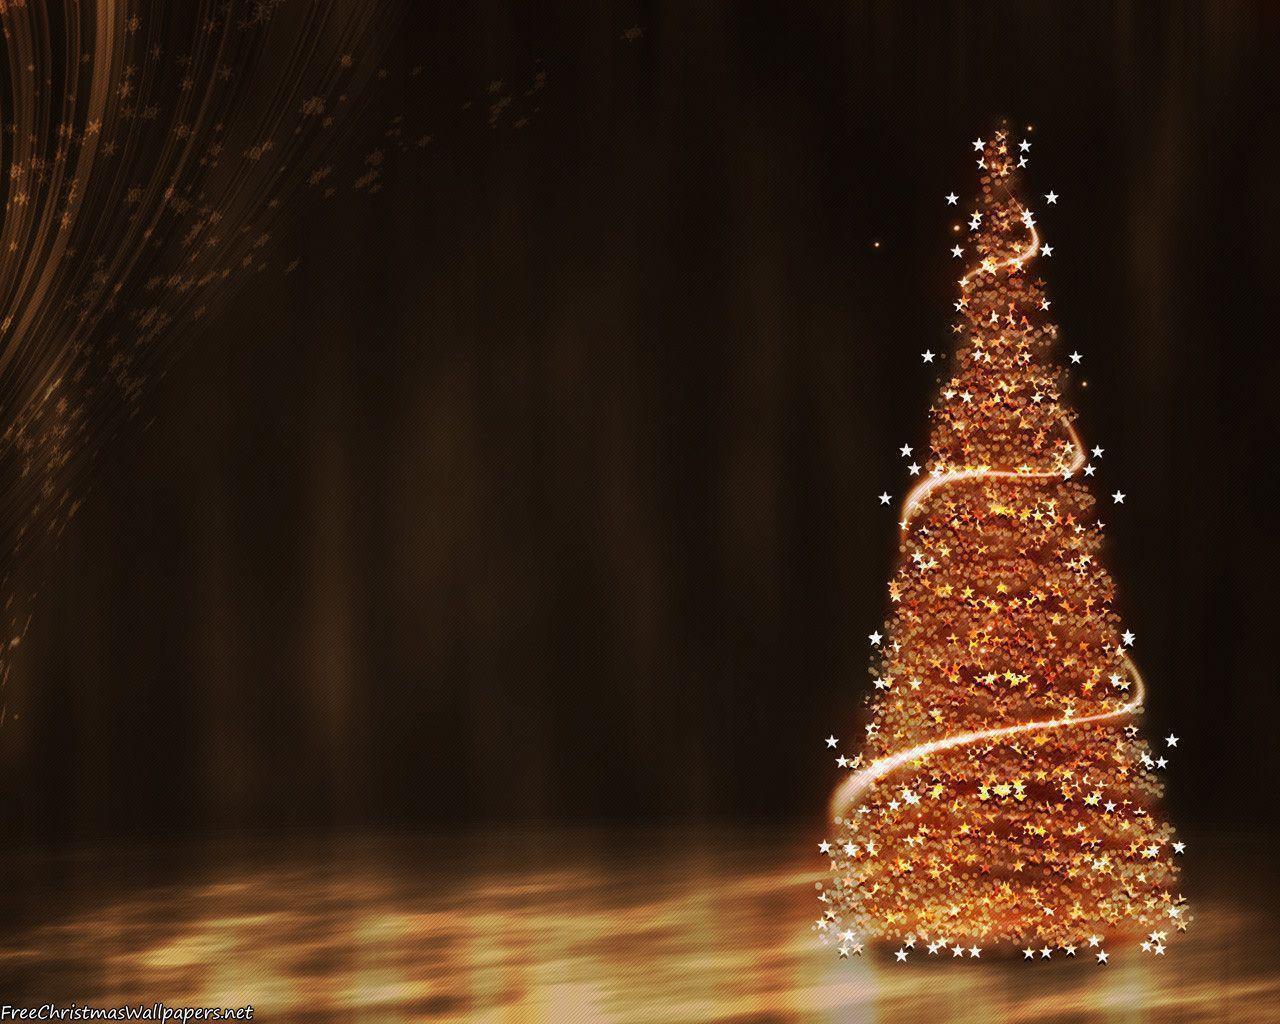 Christmas Tree Backgrounds Free - Wallpaper Cave